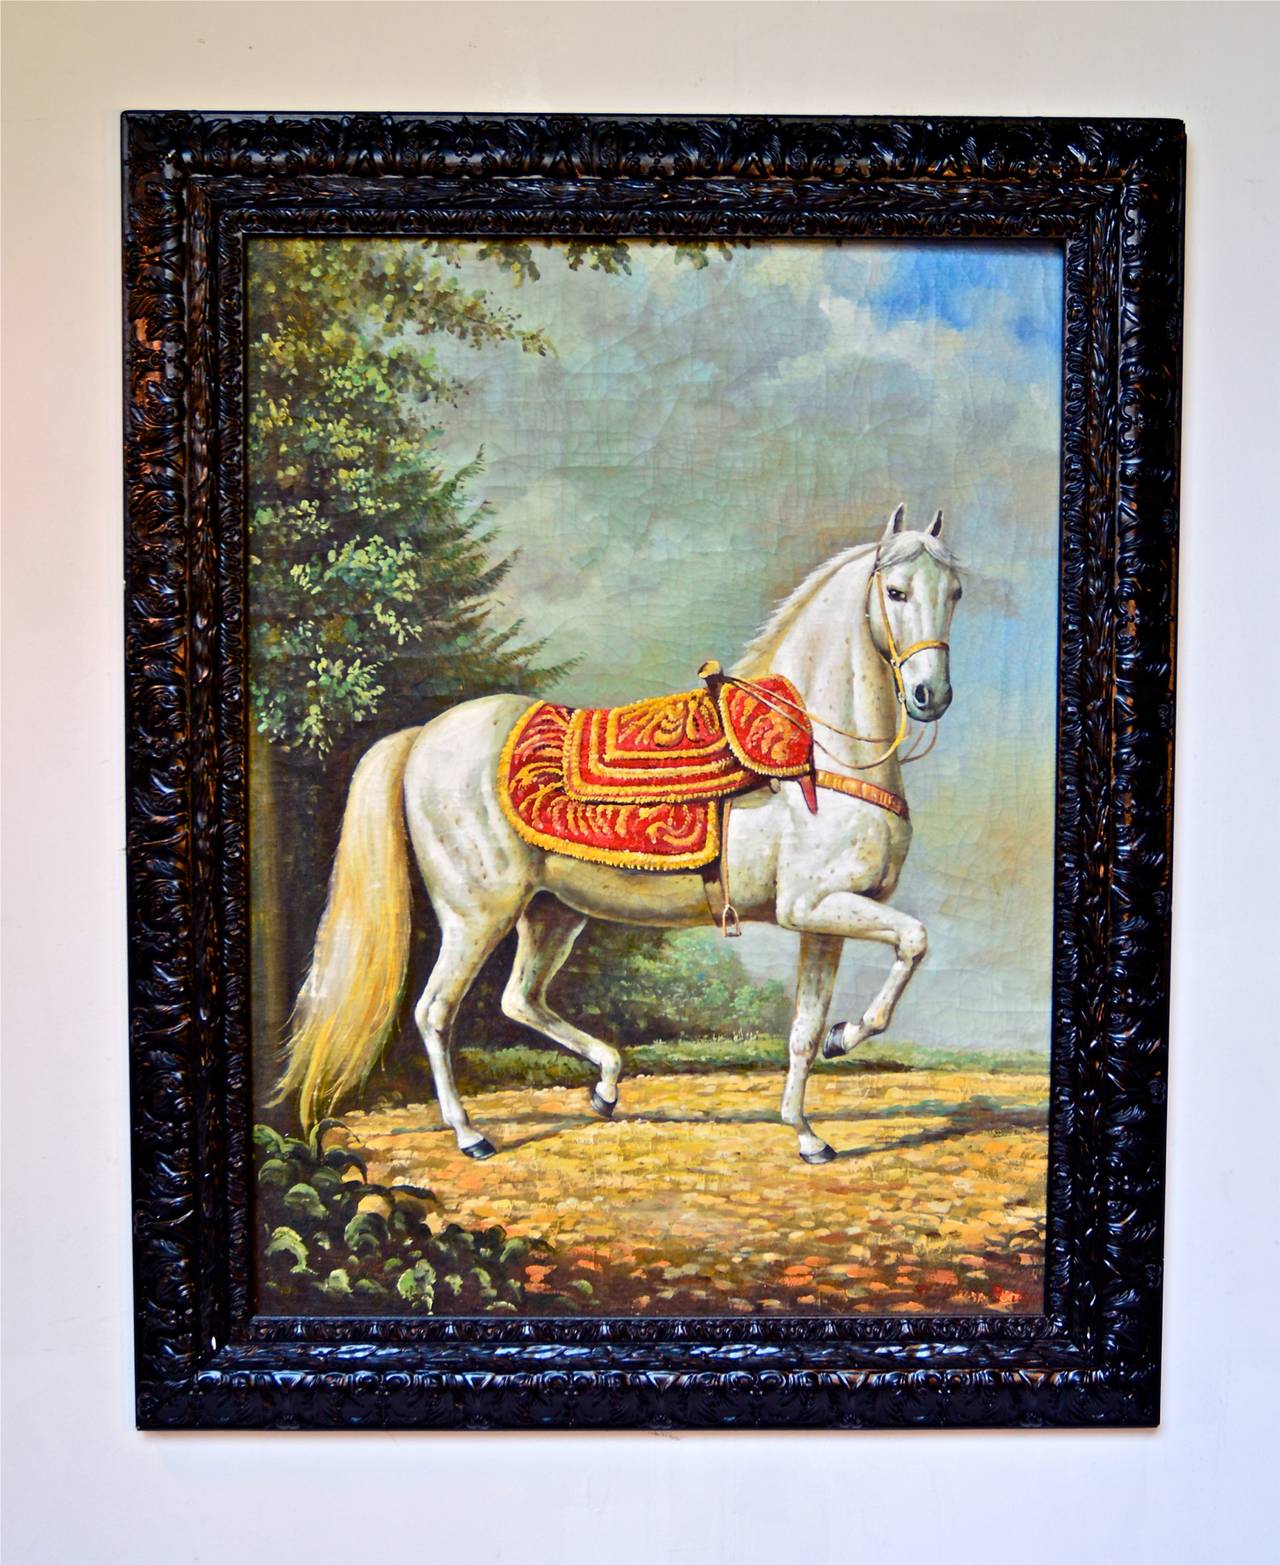 Painting of a riderless steed in the Spanish taste by William Bridge.
Oil on board housed within an ebonized frame that is not original to the work.
Signed lower right.